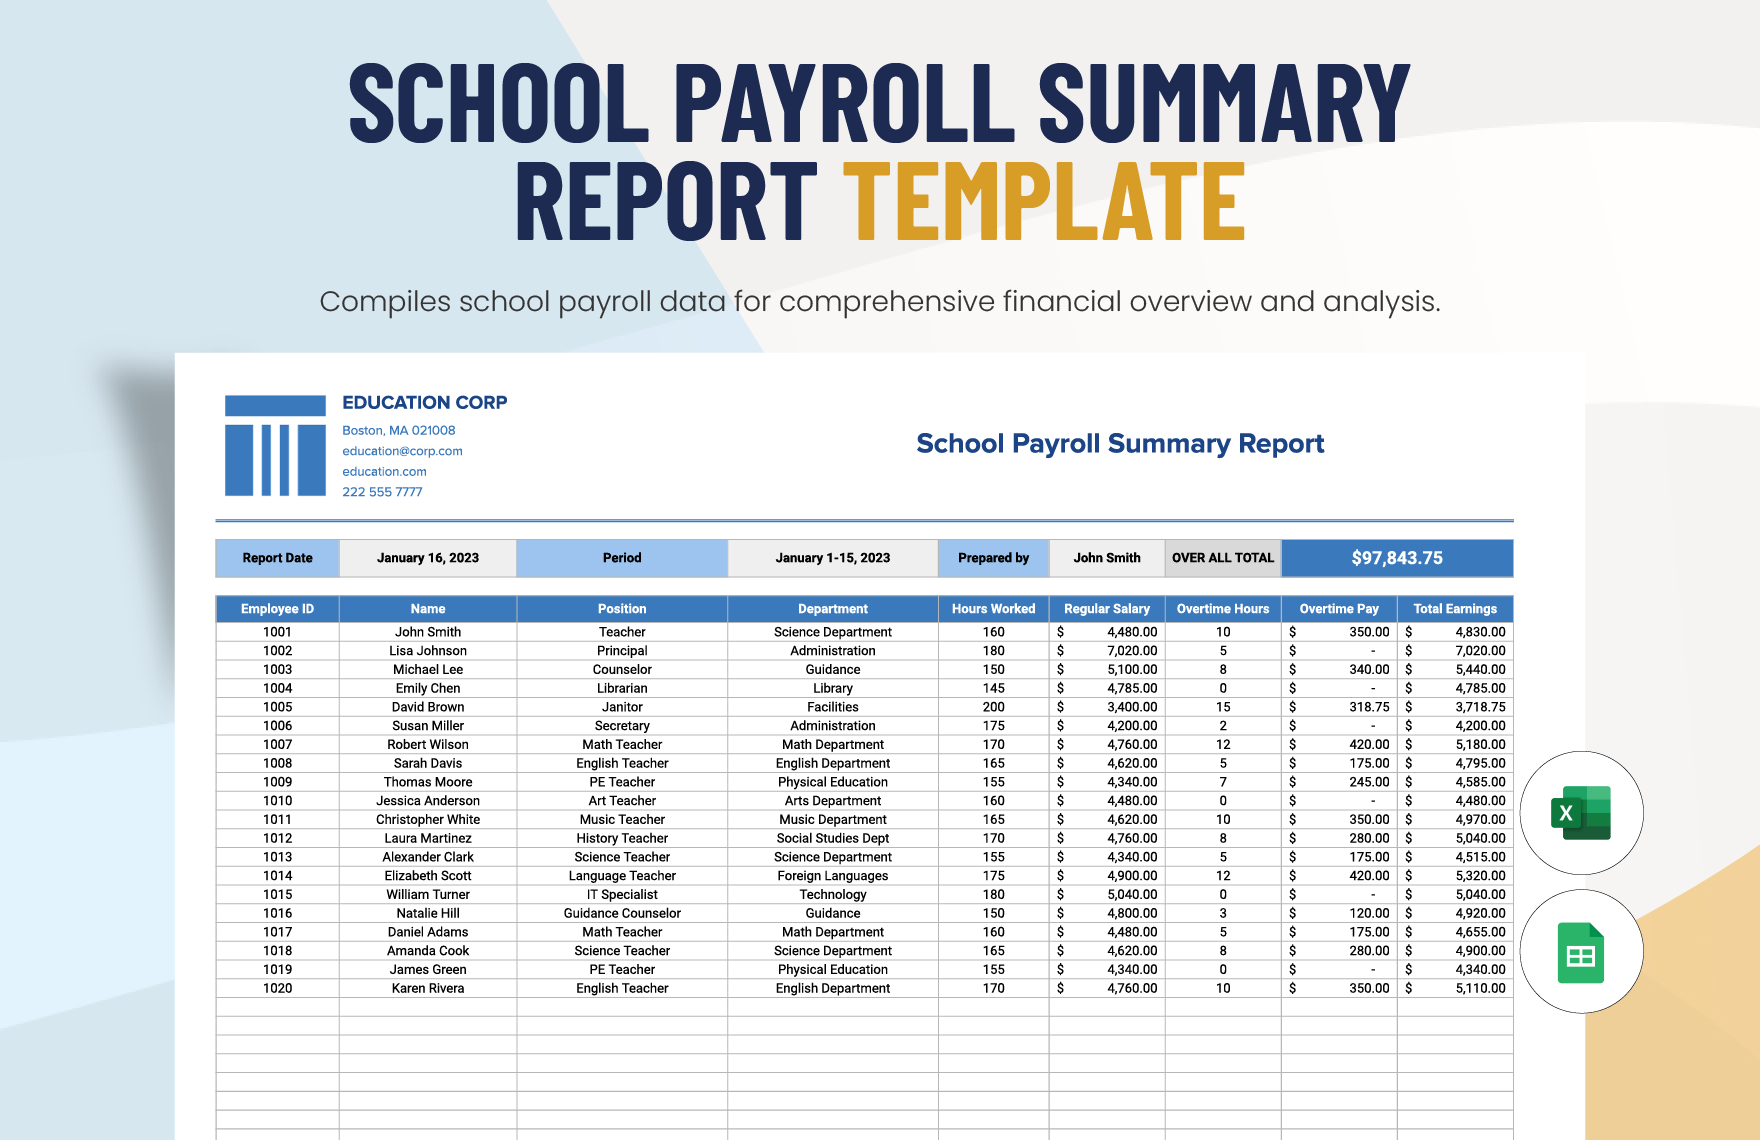 School Payroll Summary Report Template in Excel, Google Sheets